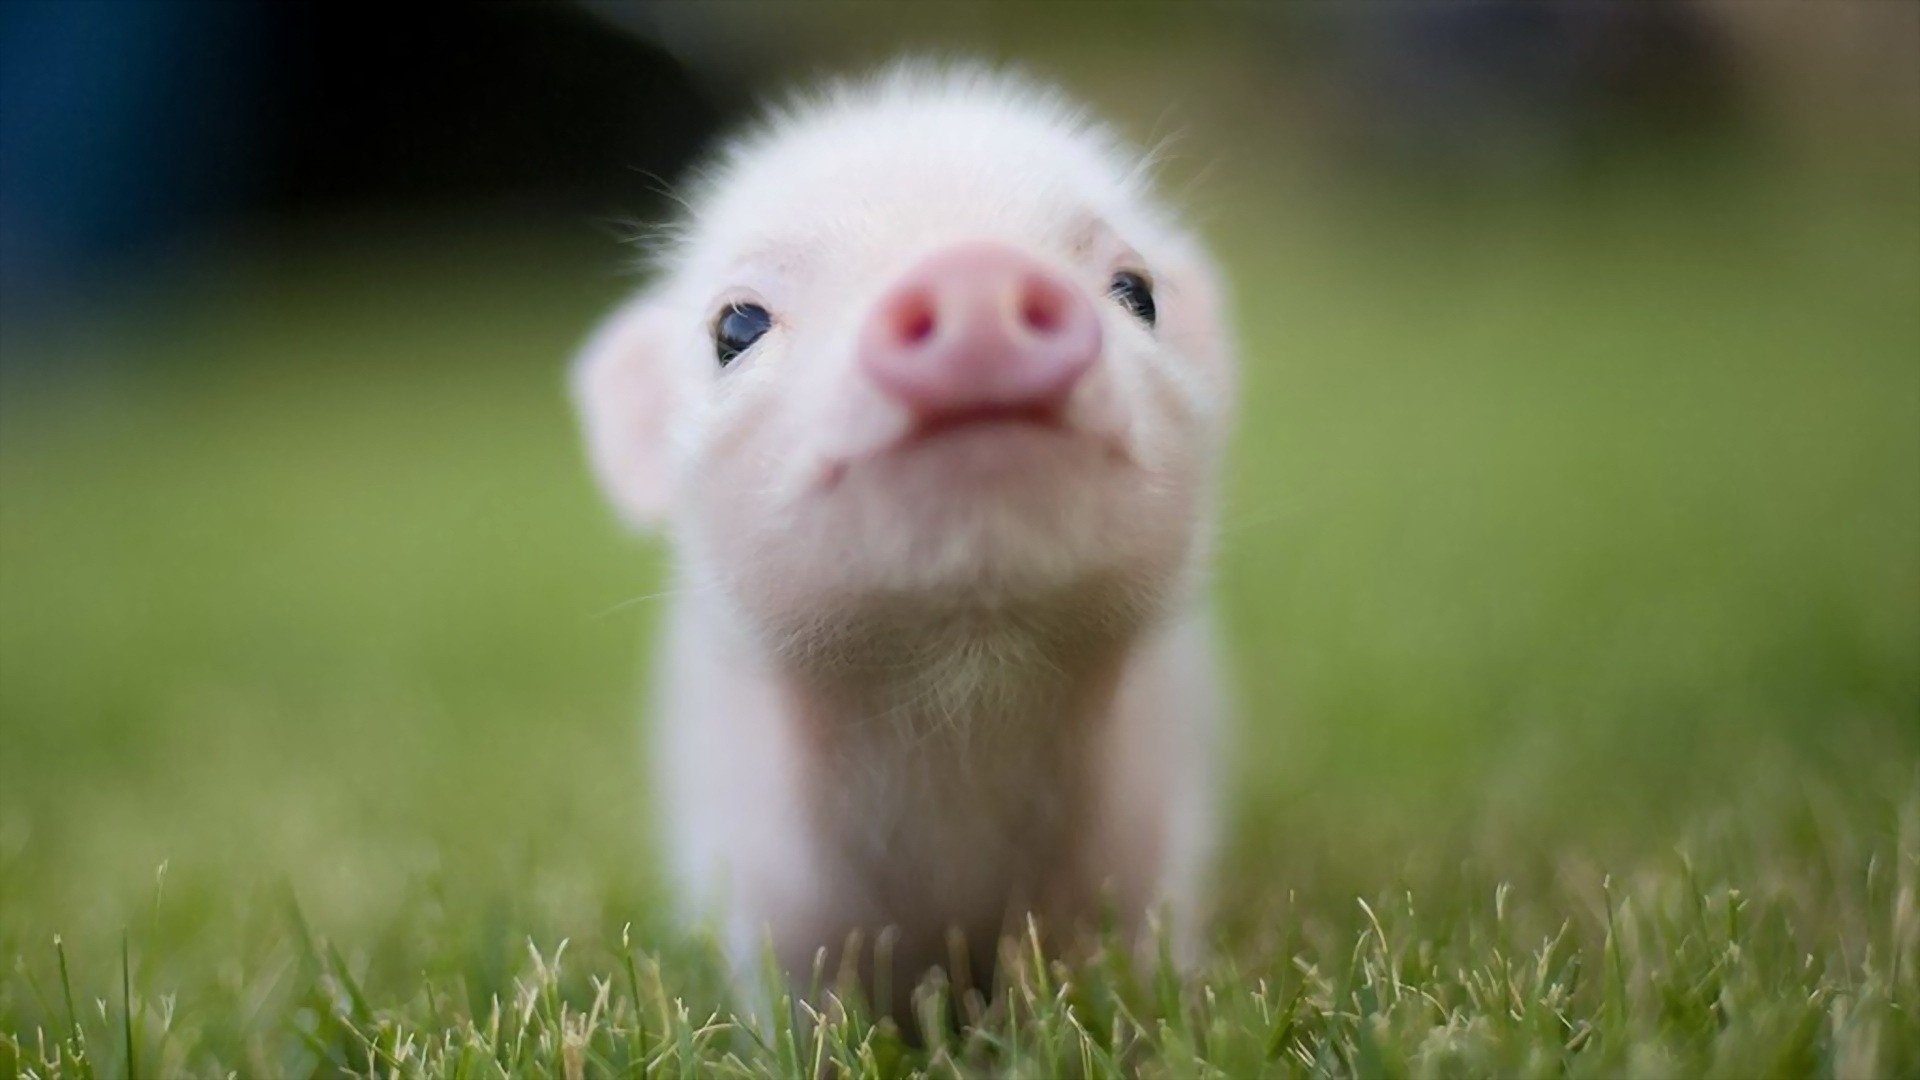 Collection of 50 pig wallpapers, Adorable pig images, Cute characters, Playful backgrounds, 1920x1080 Full HD Desktop